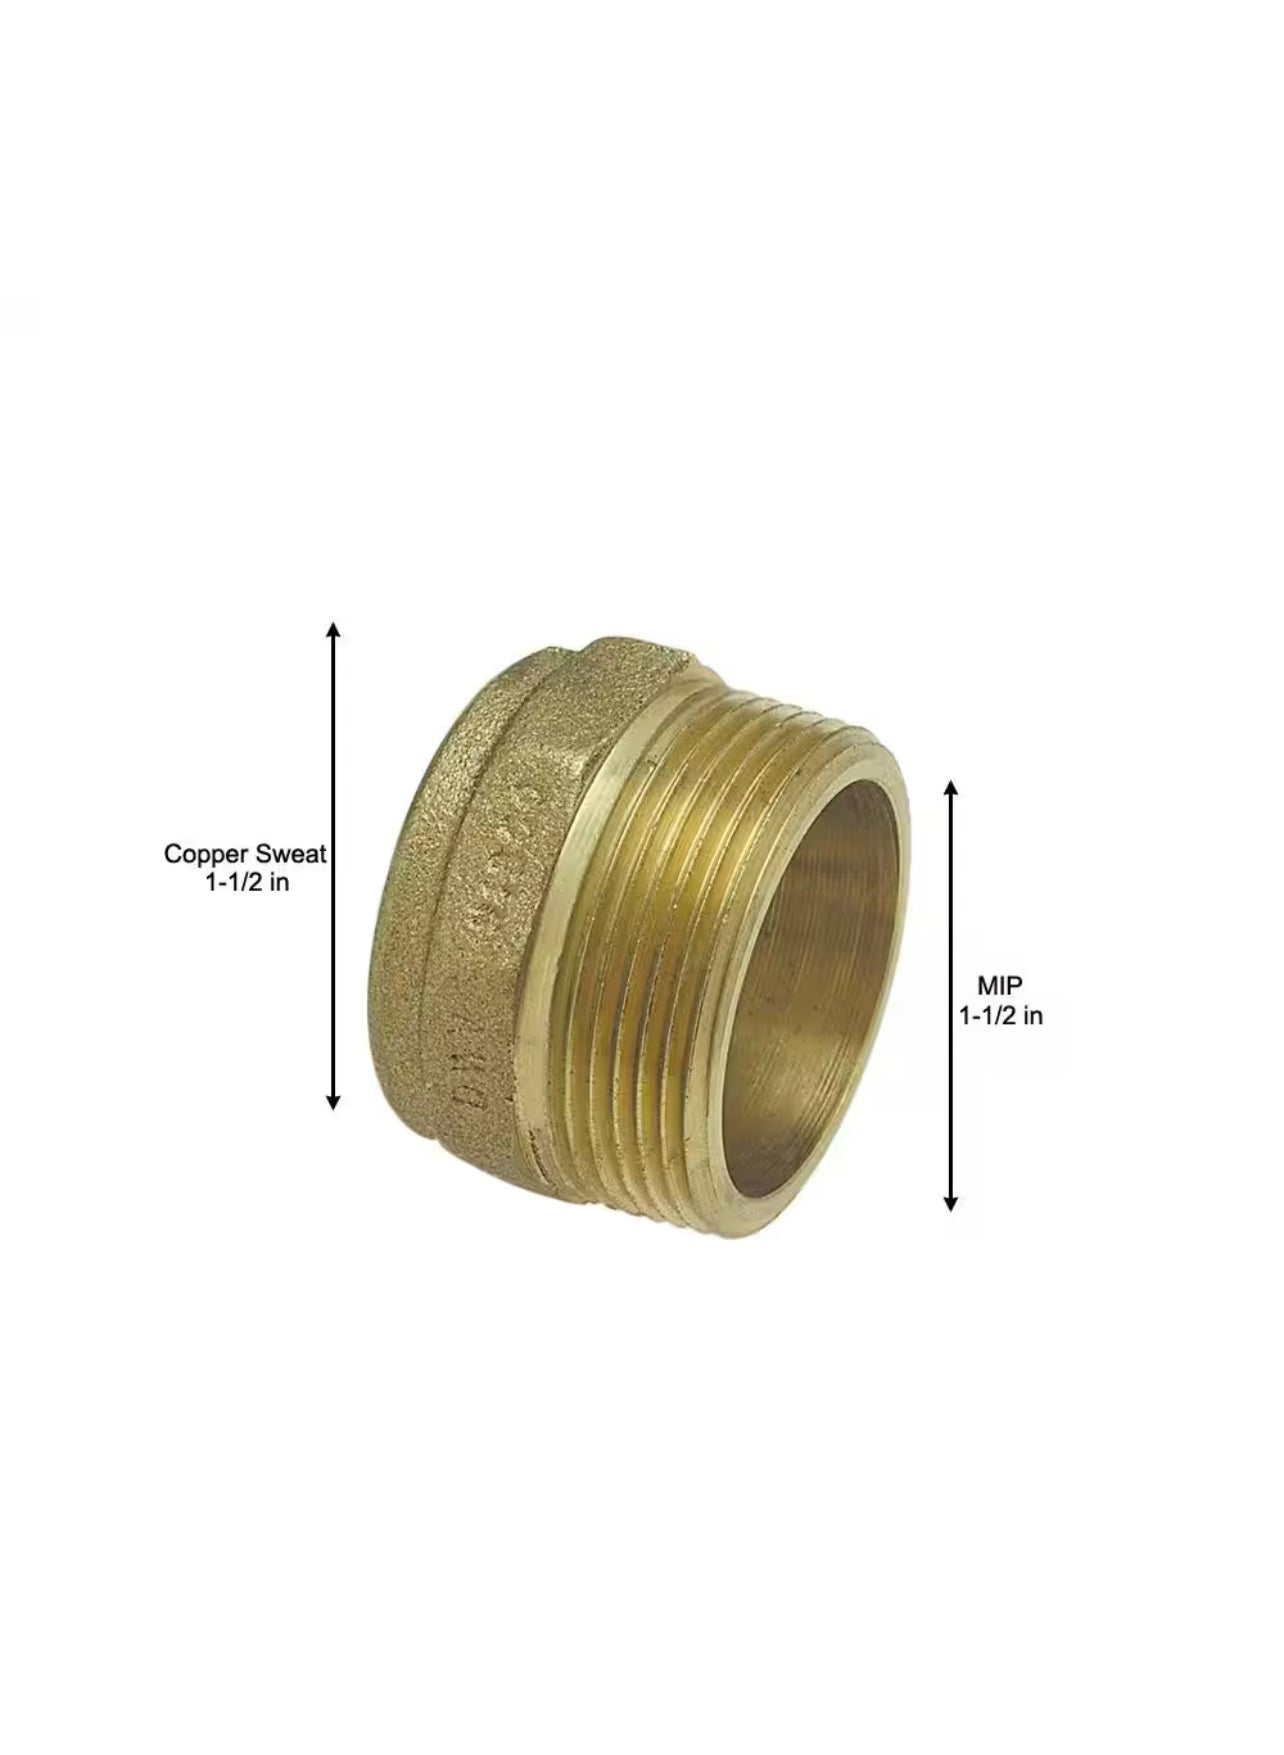 Everbilt 1-1/2 in. Bronze DWV Copper Cup x MIP Male Adapter Fitting New